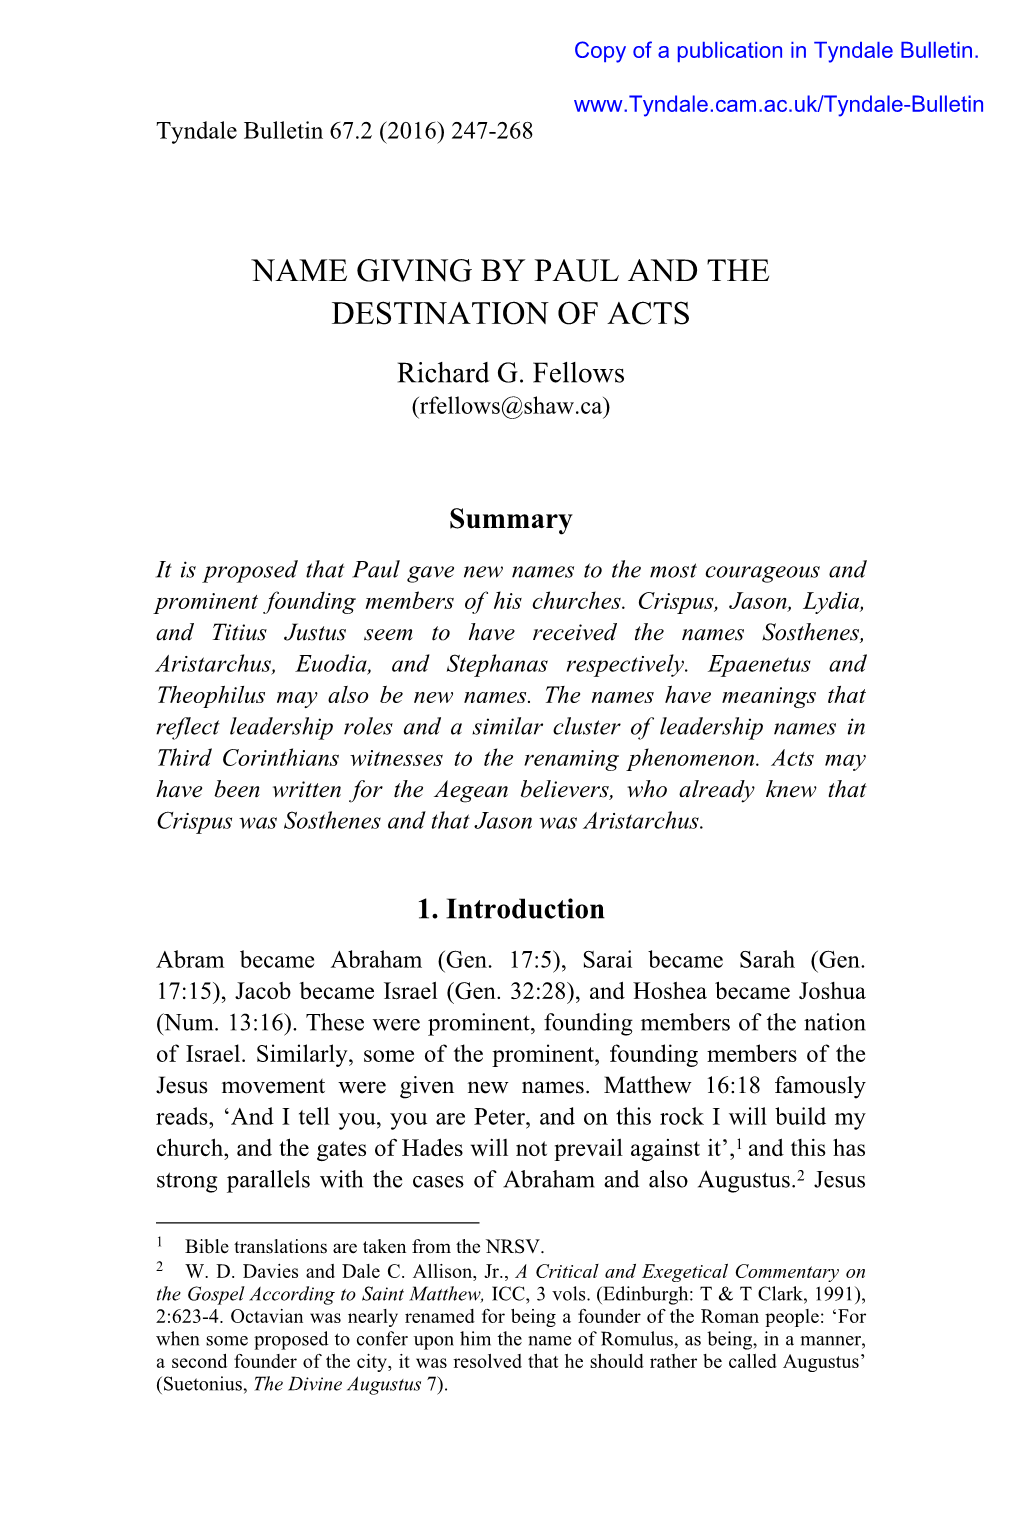 NAME GIVING by PAUL and the DESTINATION of ACTS Richard G